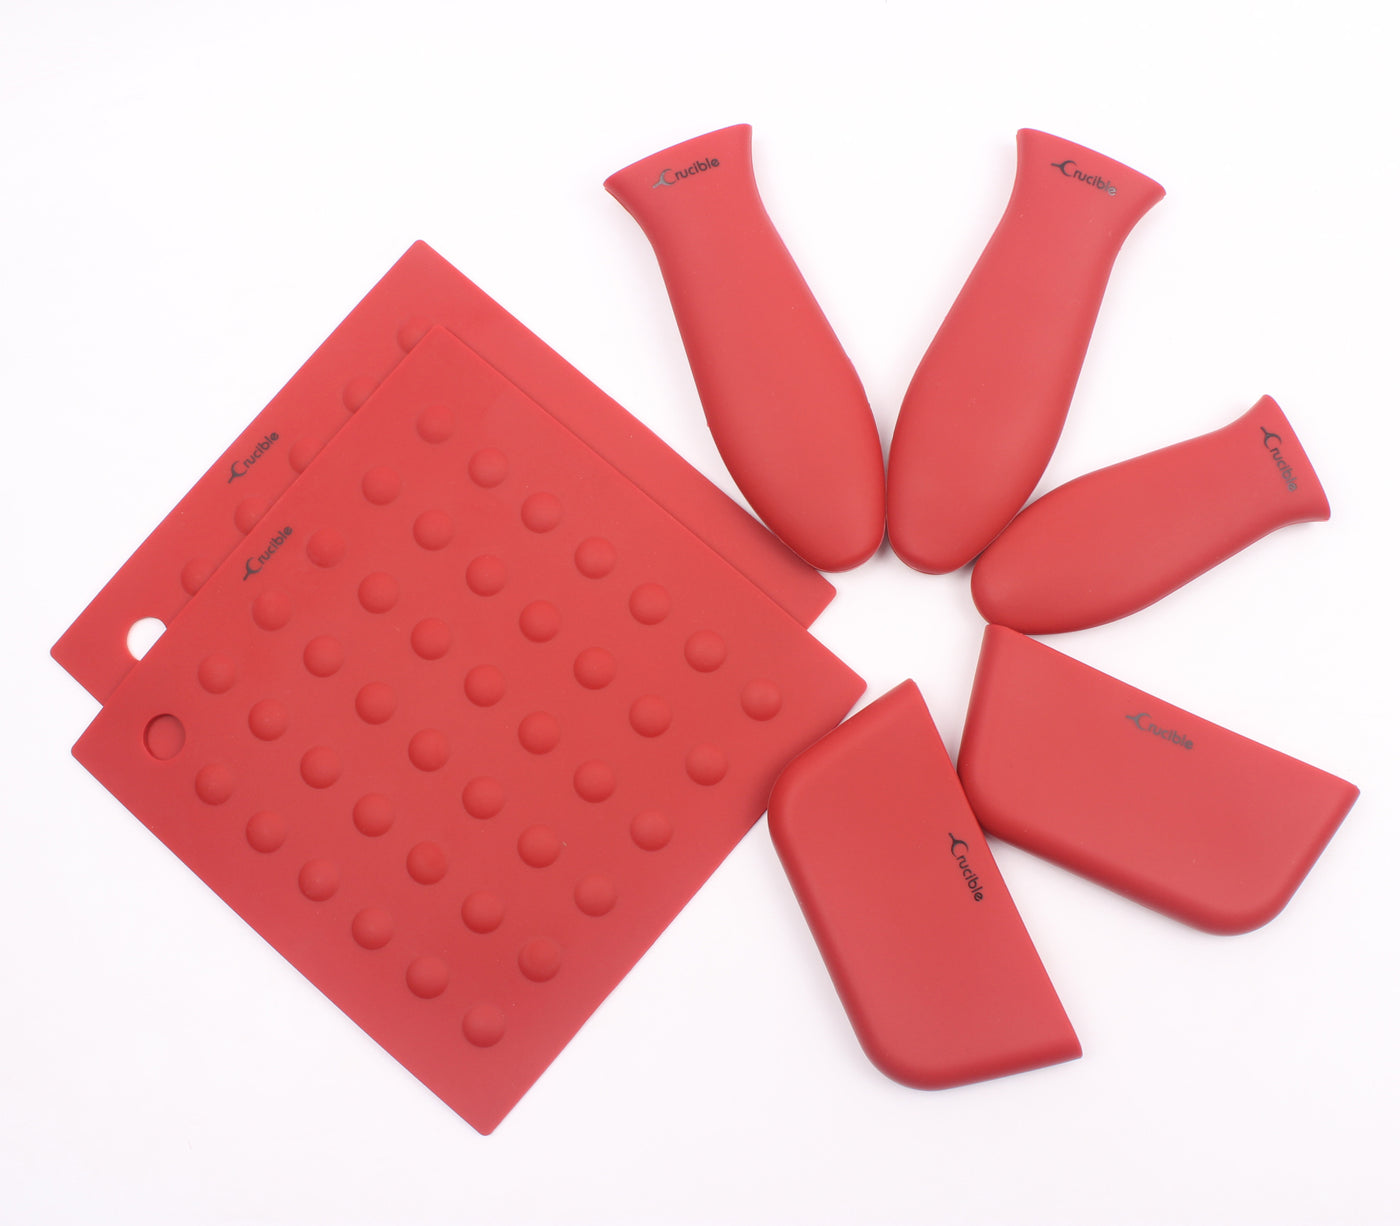 Silicone Potholders (7-Pack Mix Red) for Cast Iron Skillets and more